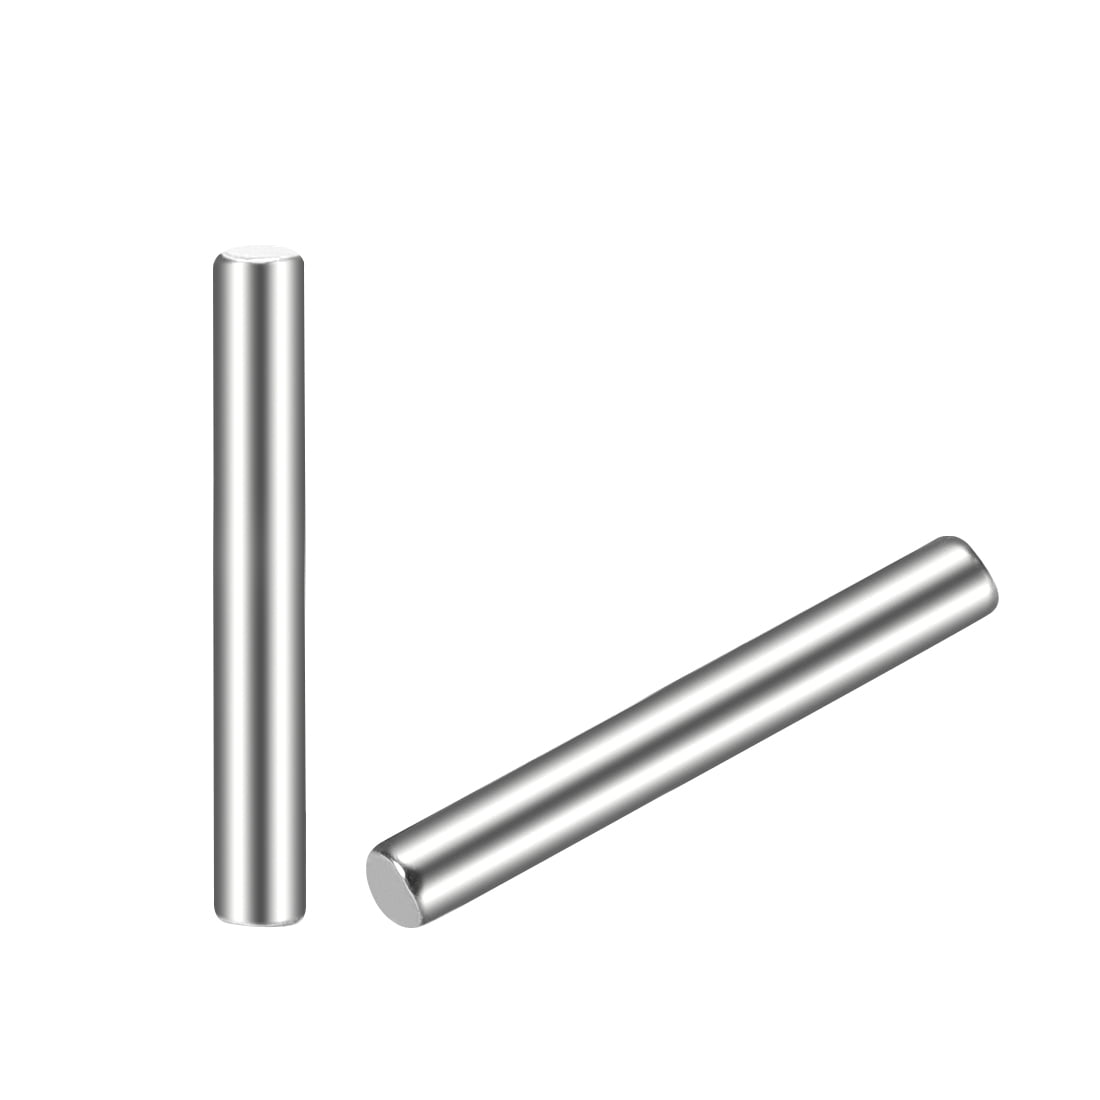 MroMax 10Pcs 10mm x 16mm Dowel Pin 304 Stainless Steel Wood Bunk Bed Dowel Pins Shelf Pegs Support Shelves Silver Tone 